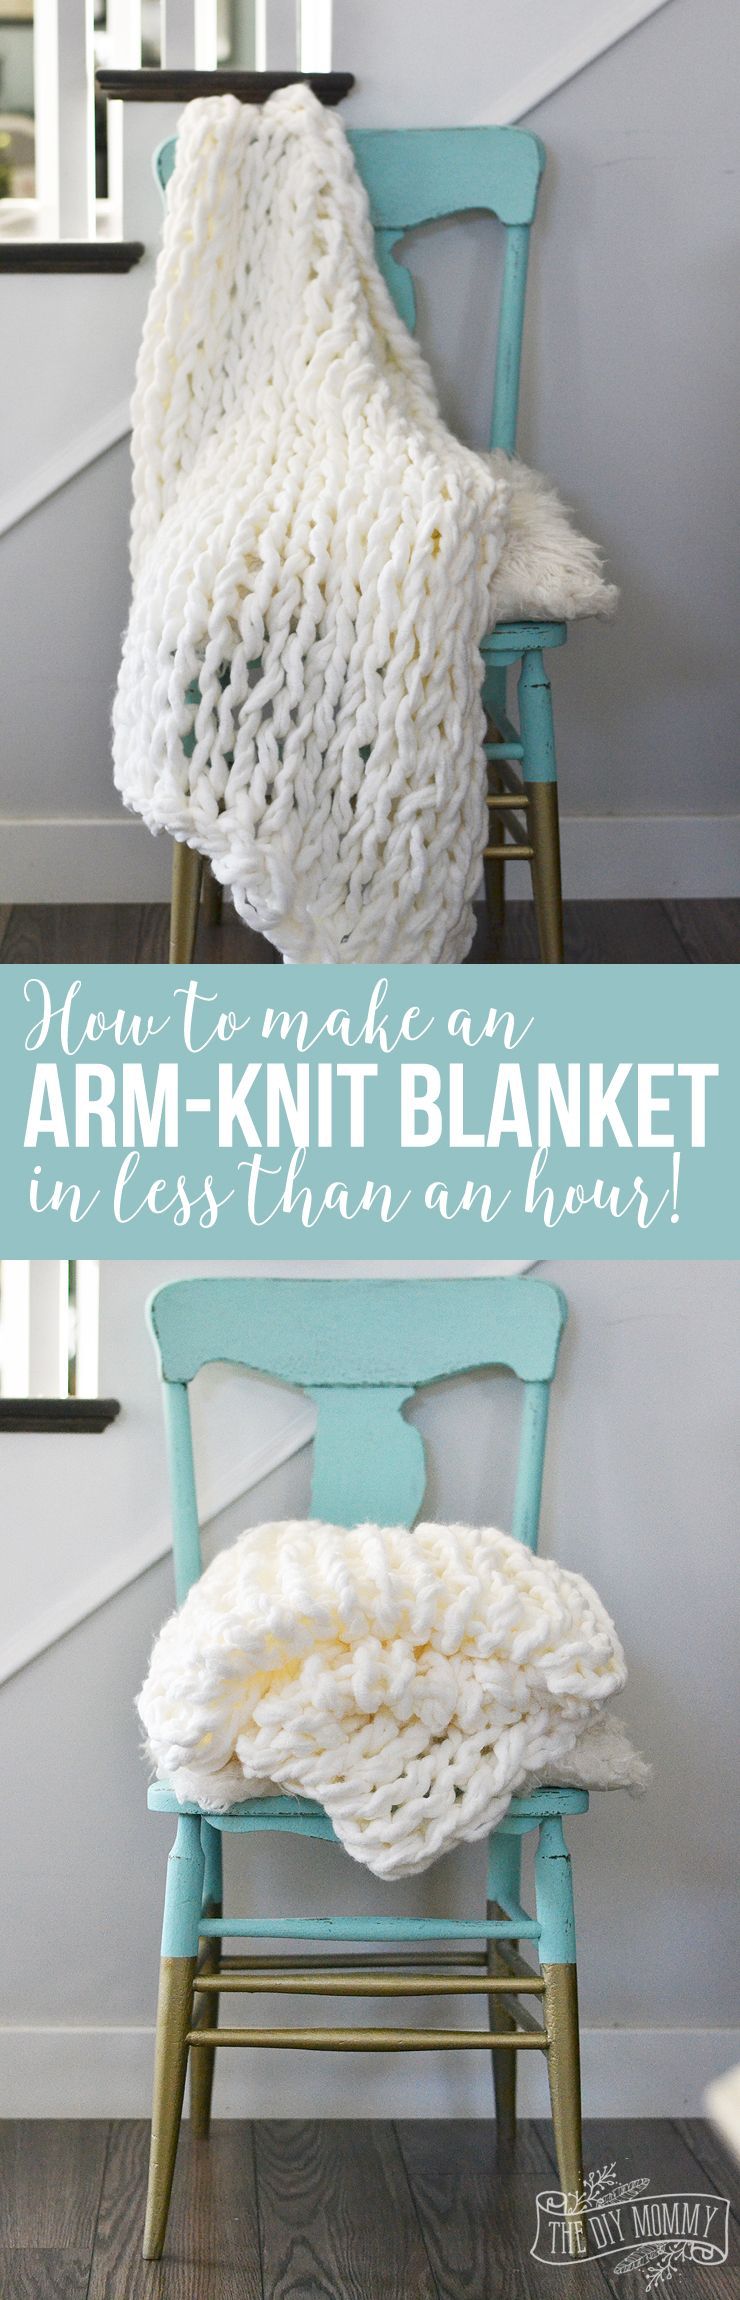 How to Make an Arm Knit Blanket in Less Than an Hour (Video)